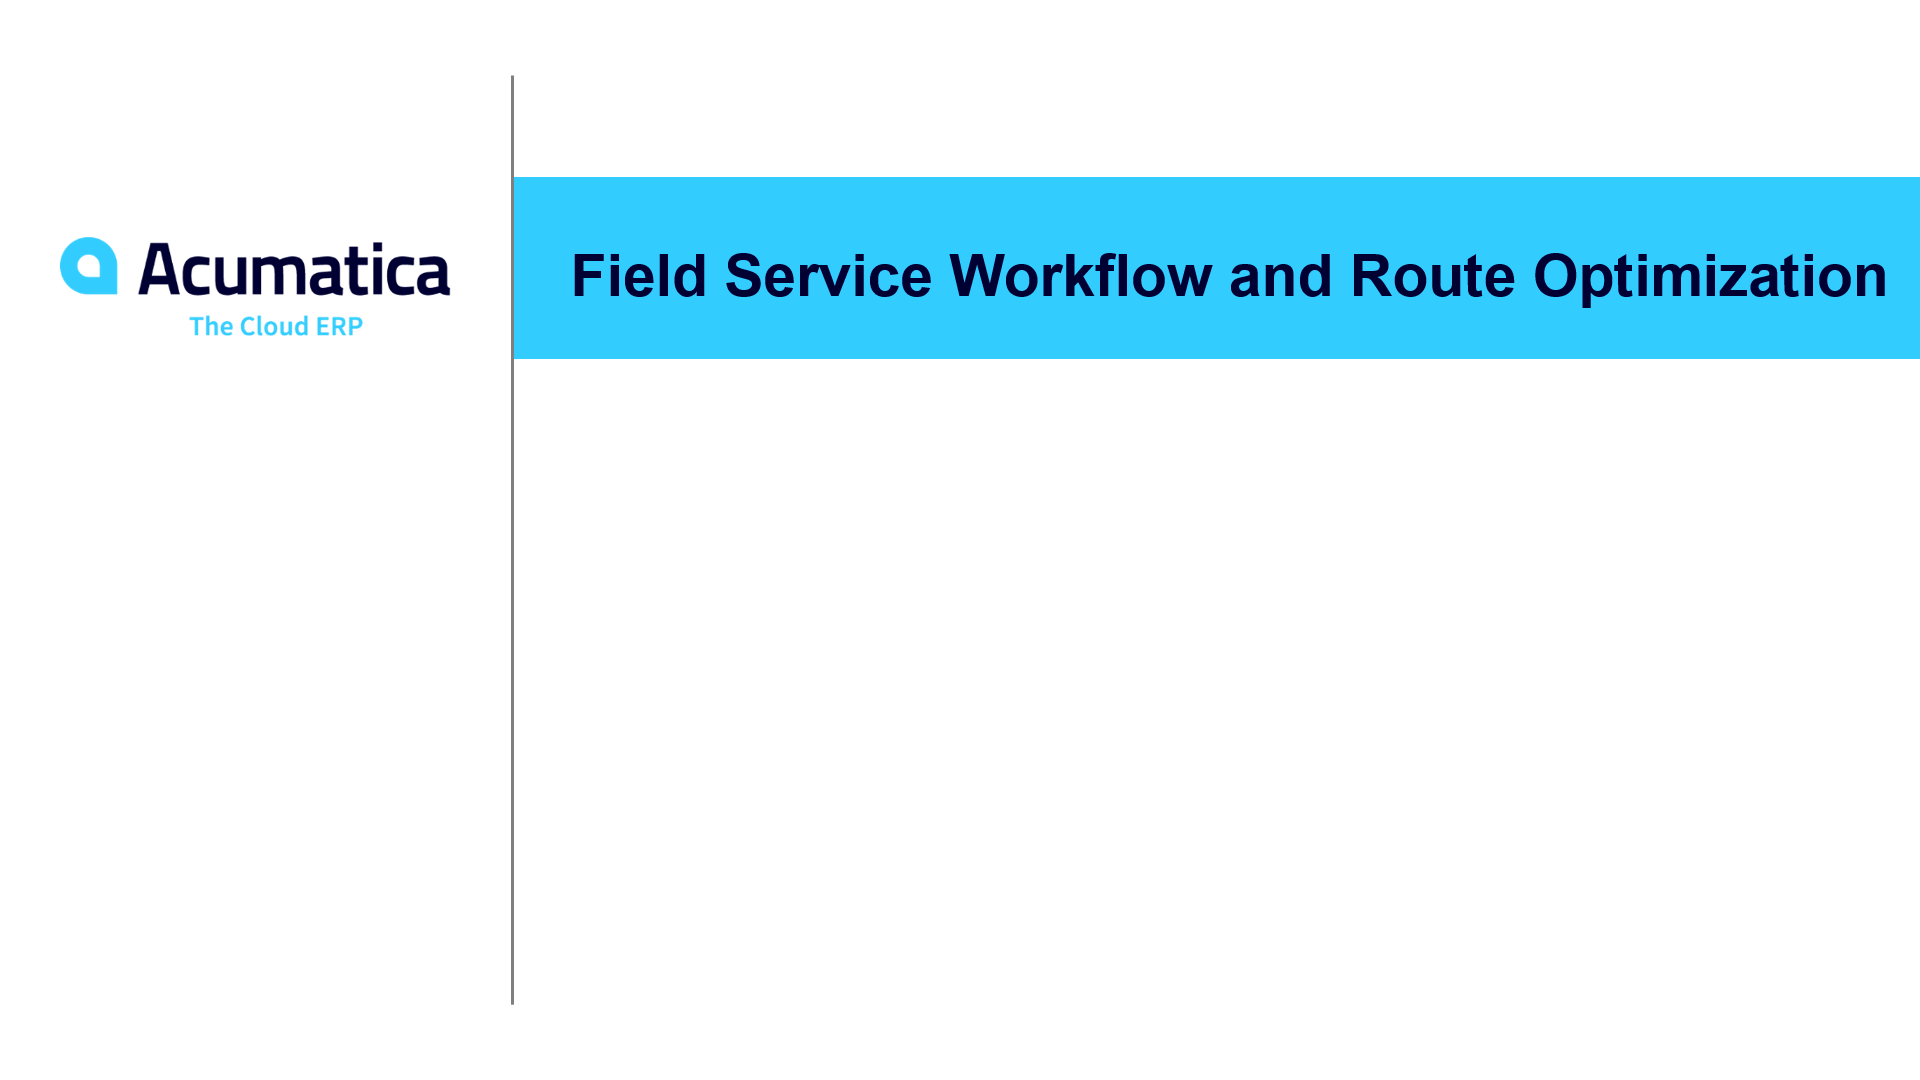 Field service workflow and route optimization (January 2020)